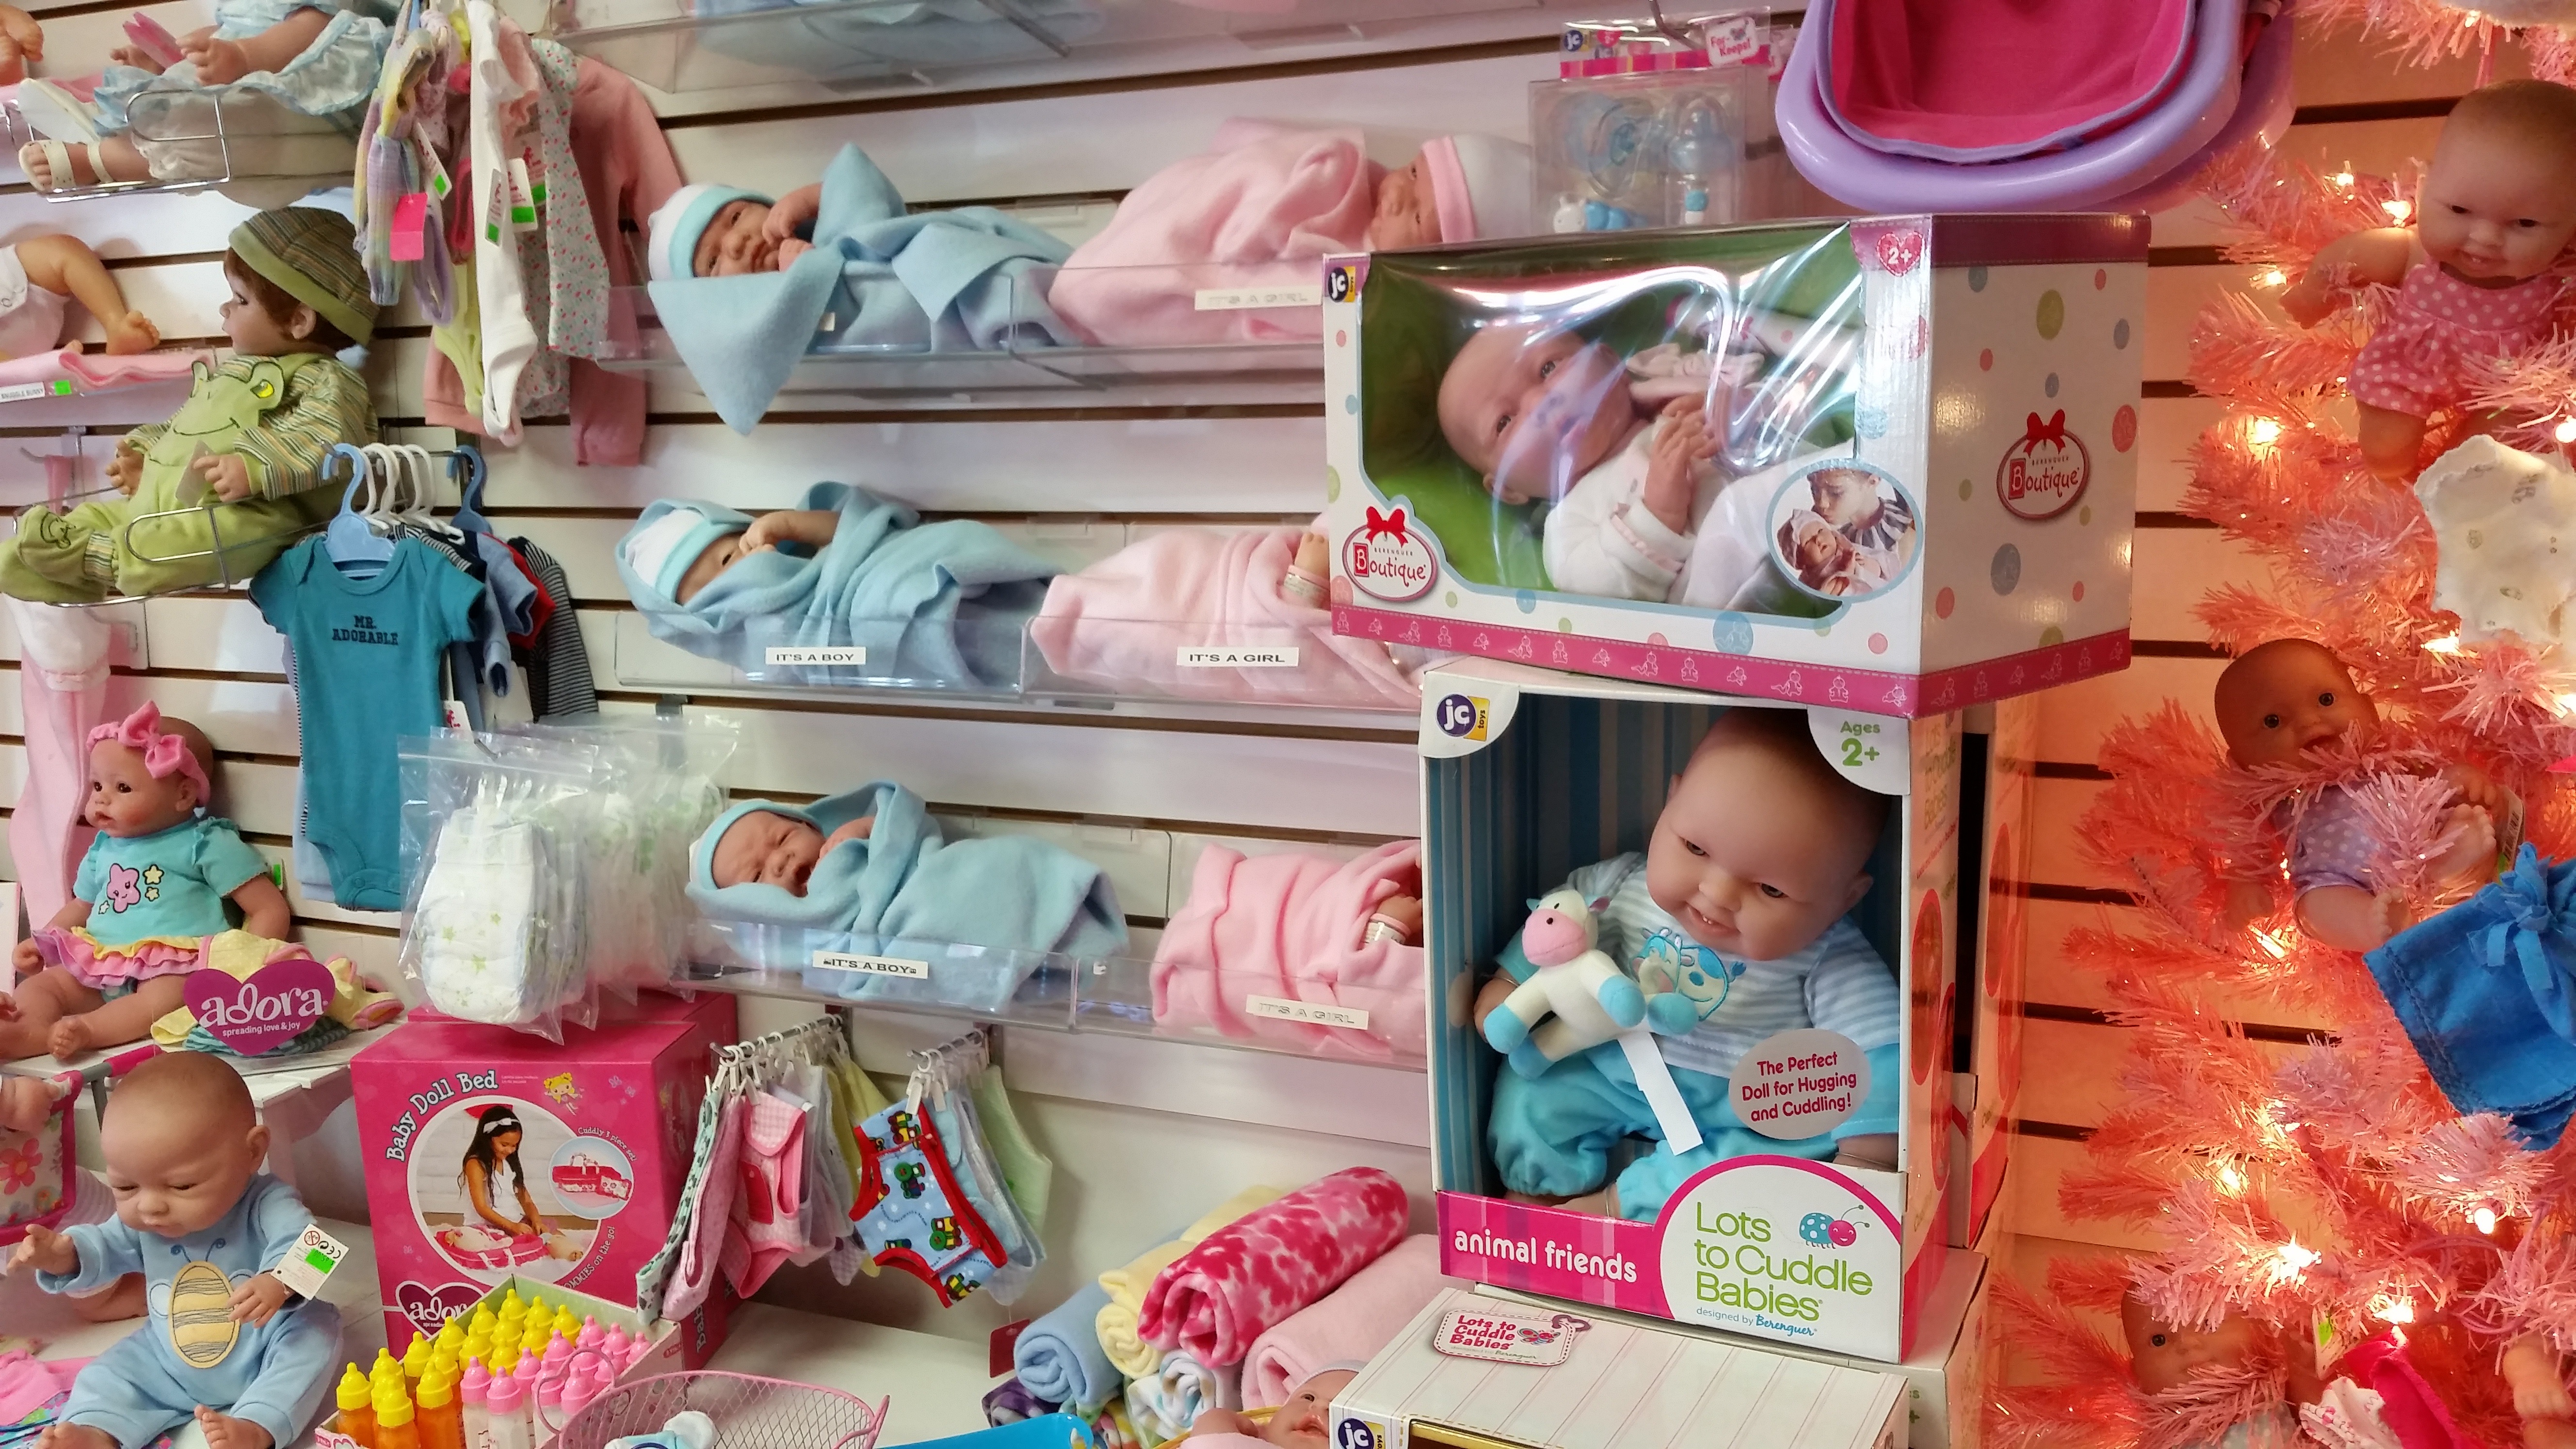 The store features an array of baby dolls and accessories.